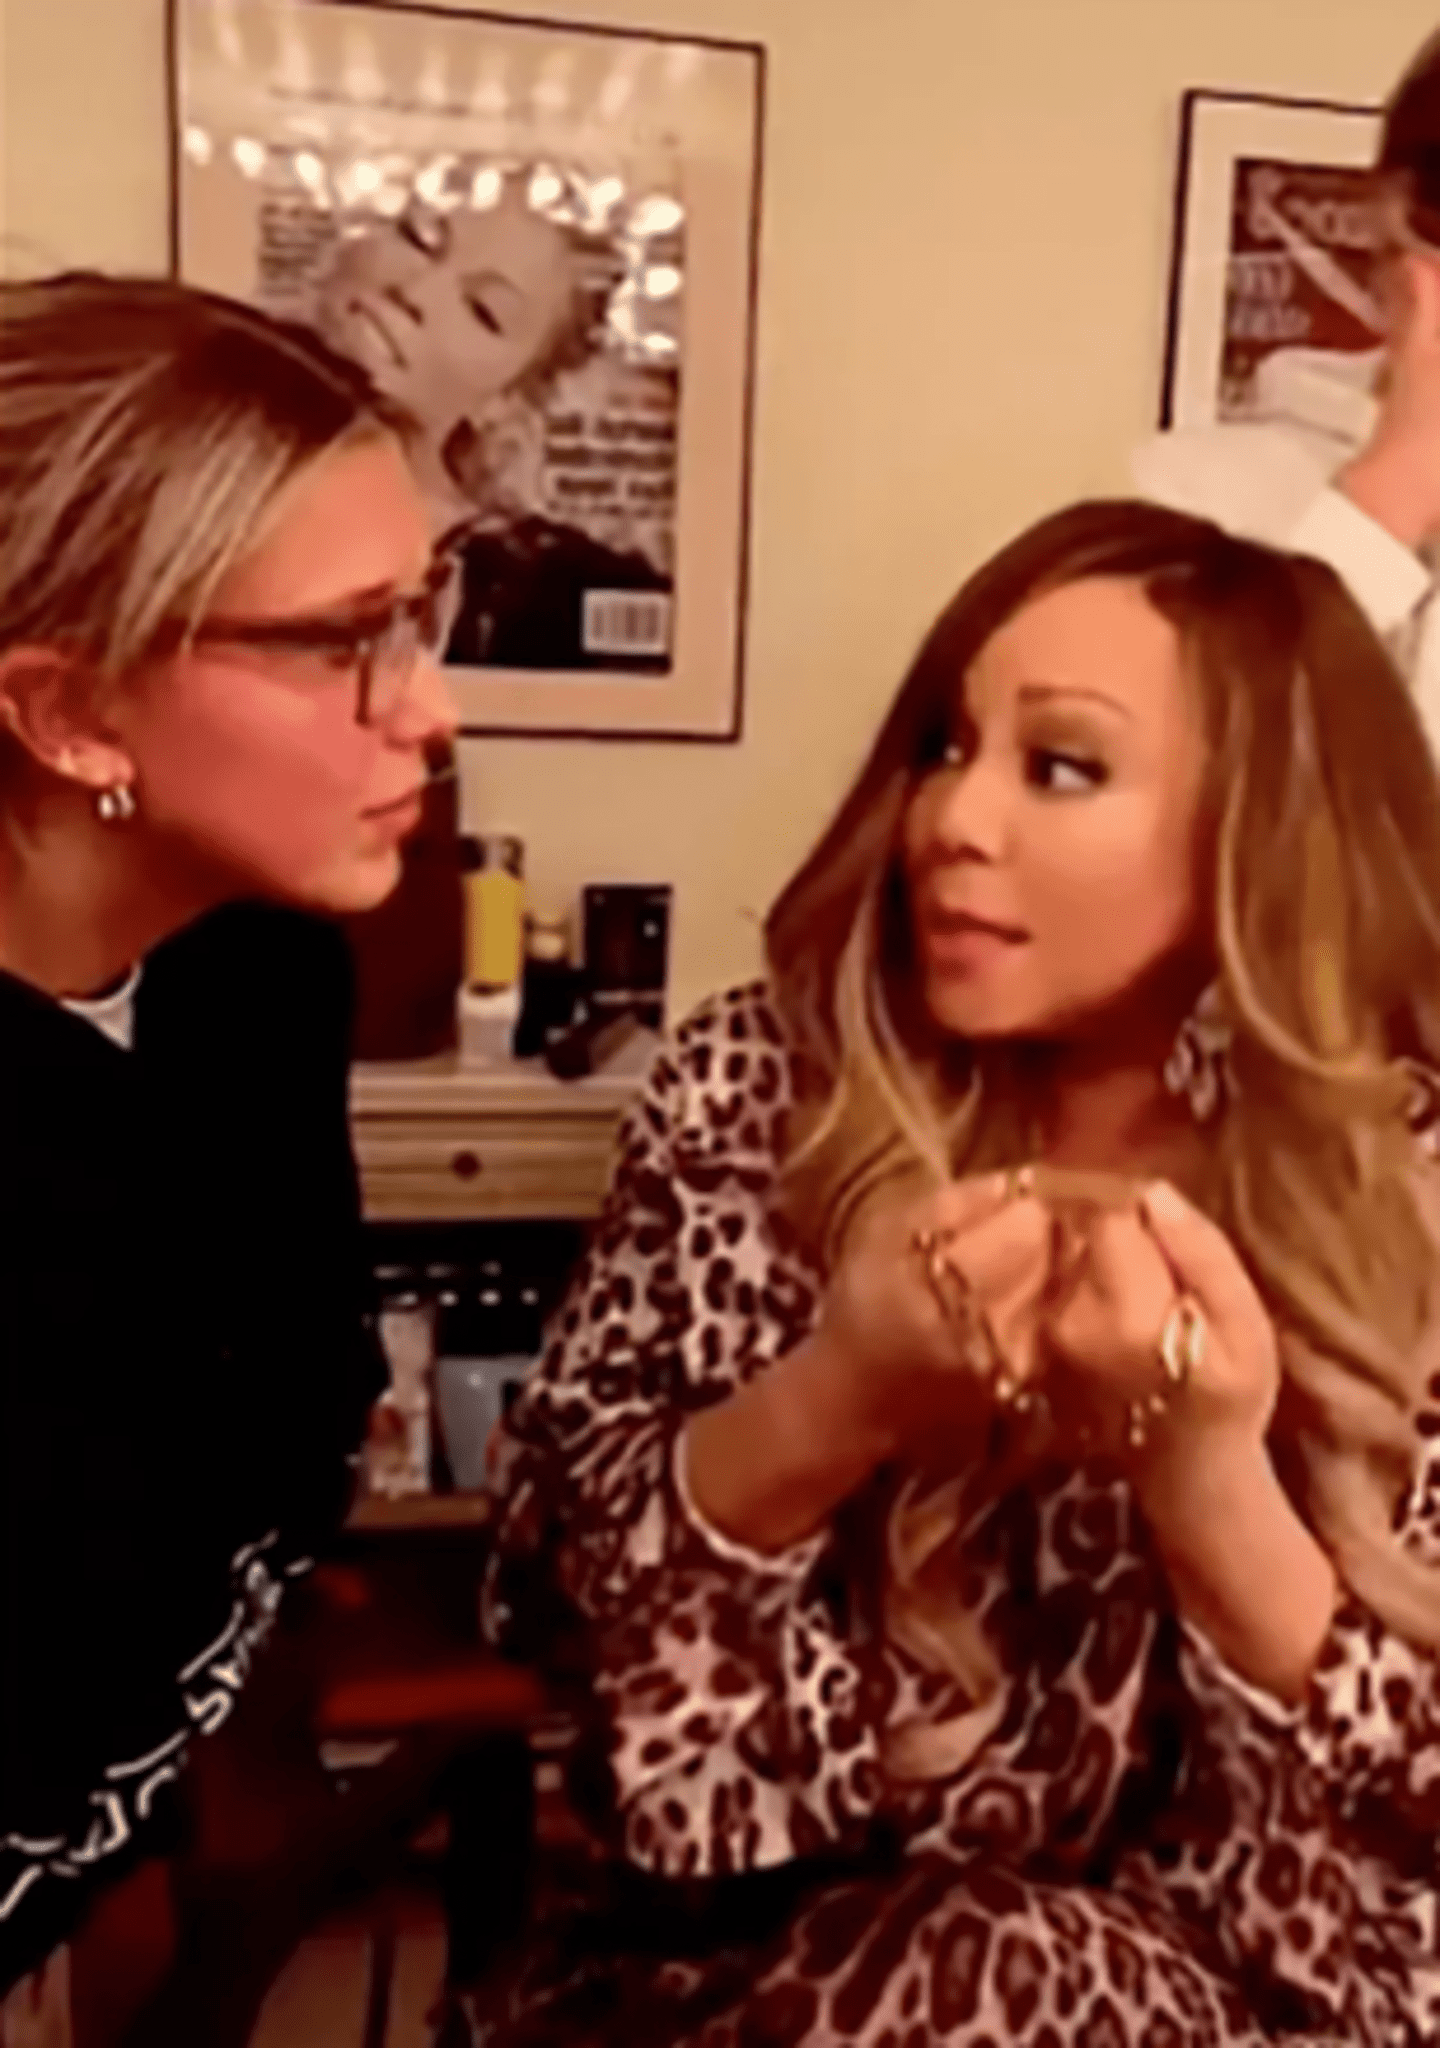 Mariah Carey and Millie Bobby Brown Have Joined Forces for a TikTok Post Recreating the Star's Iconic "Honey" Video